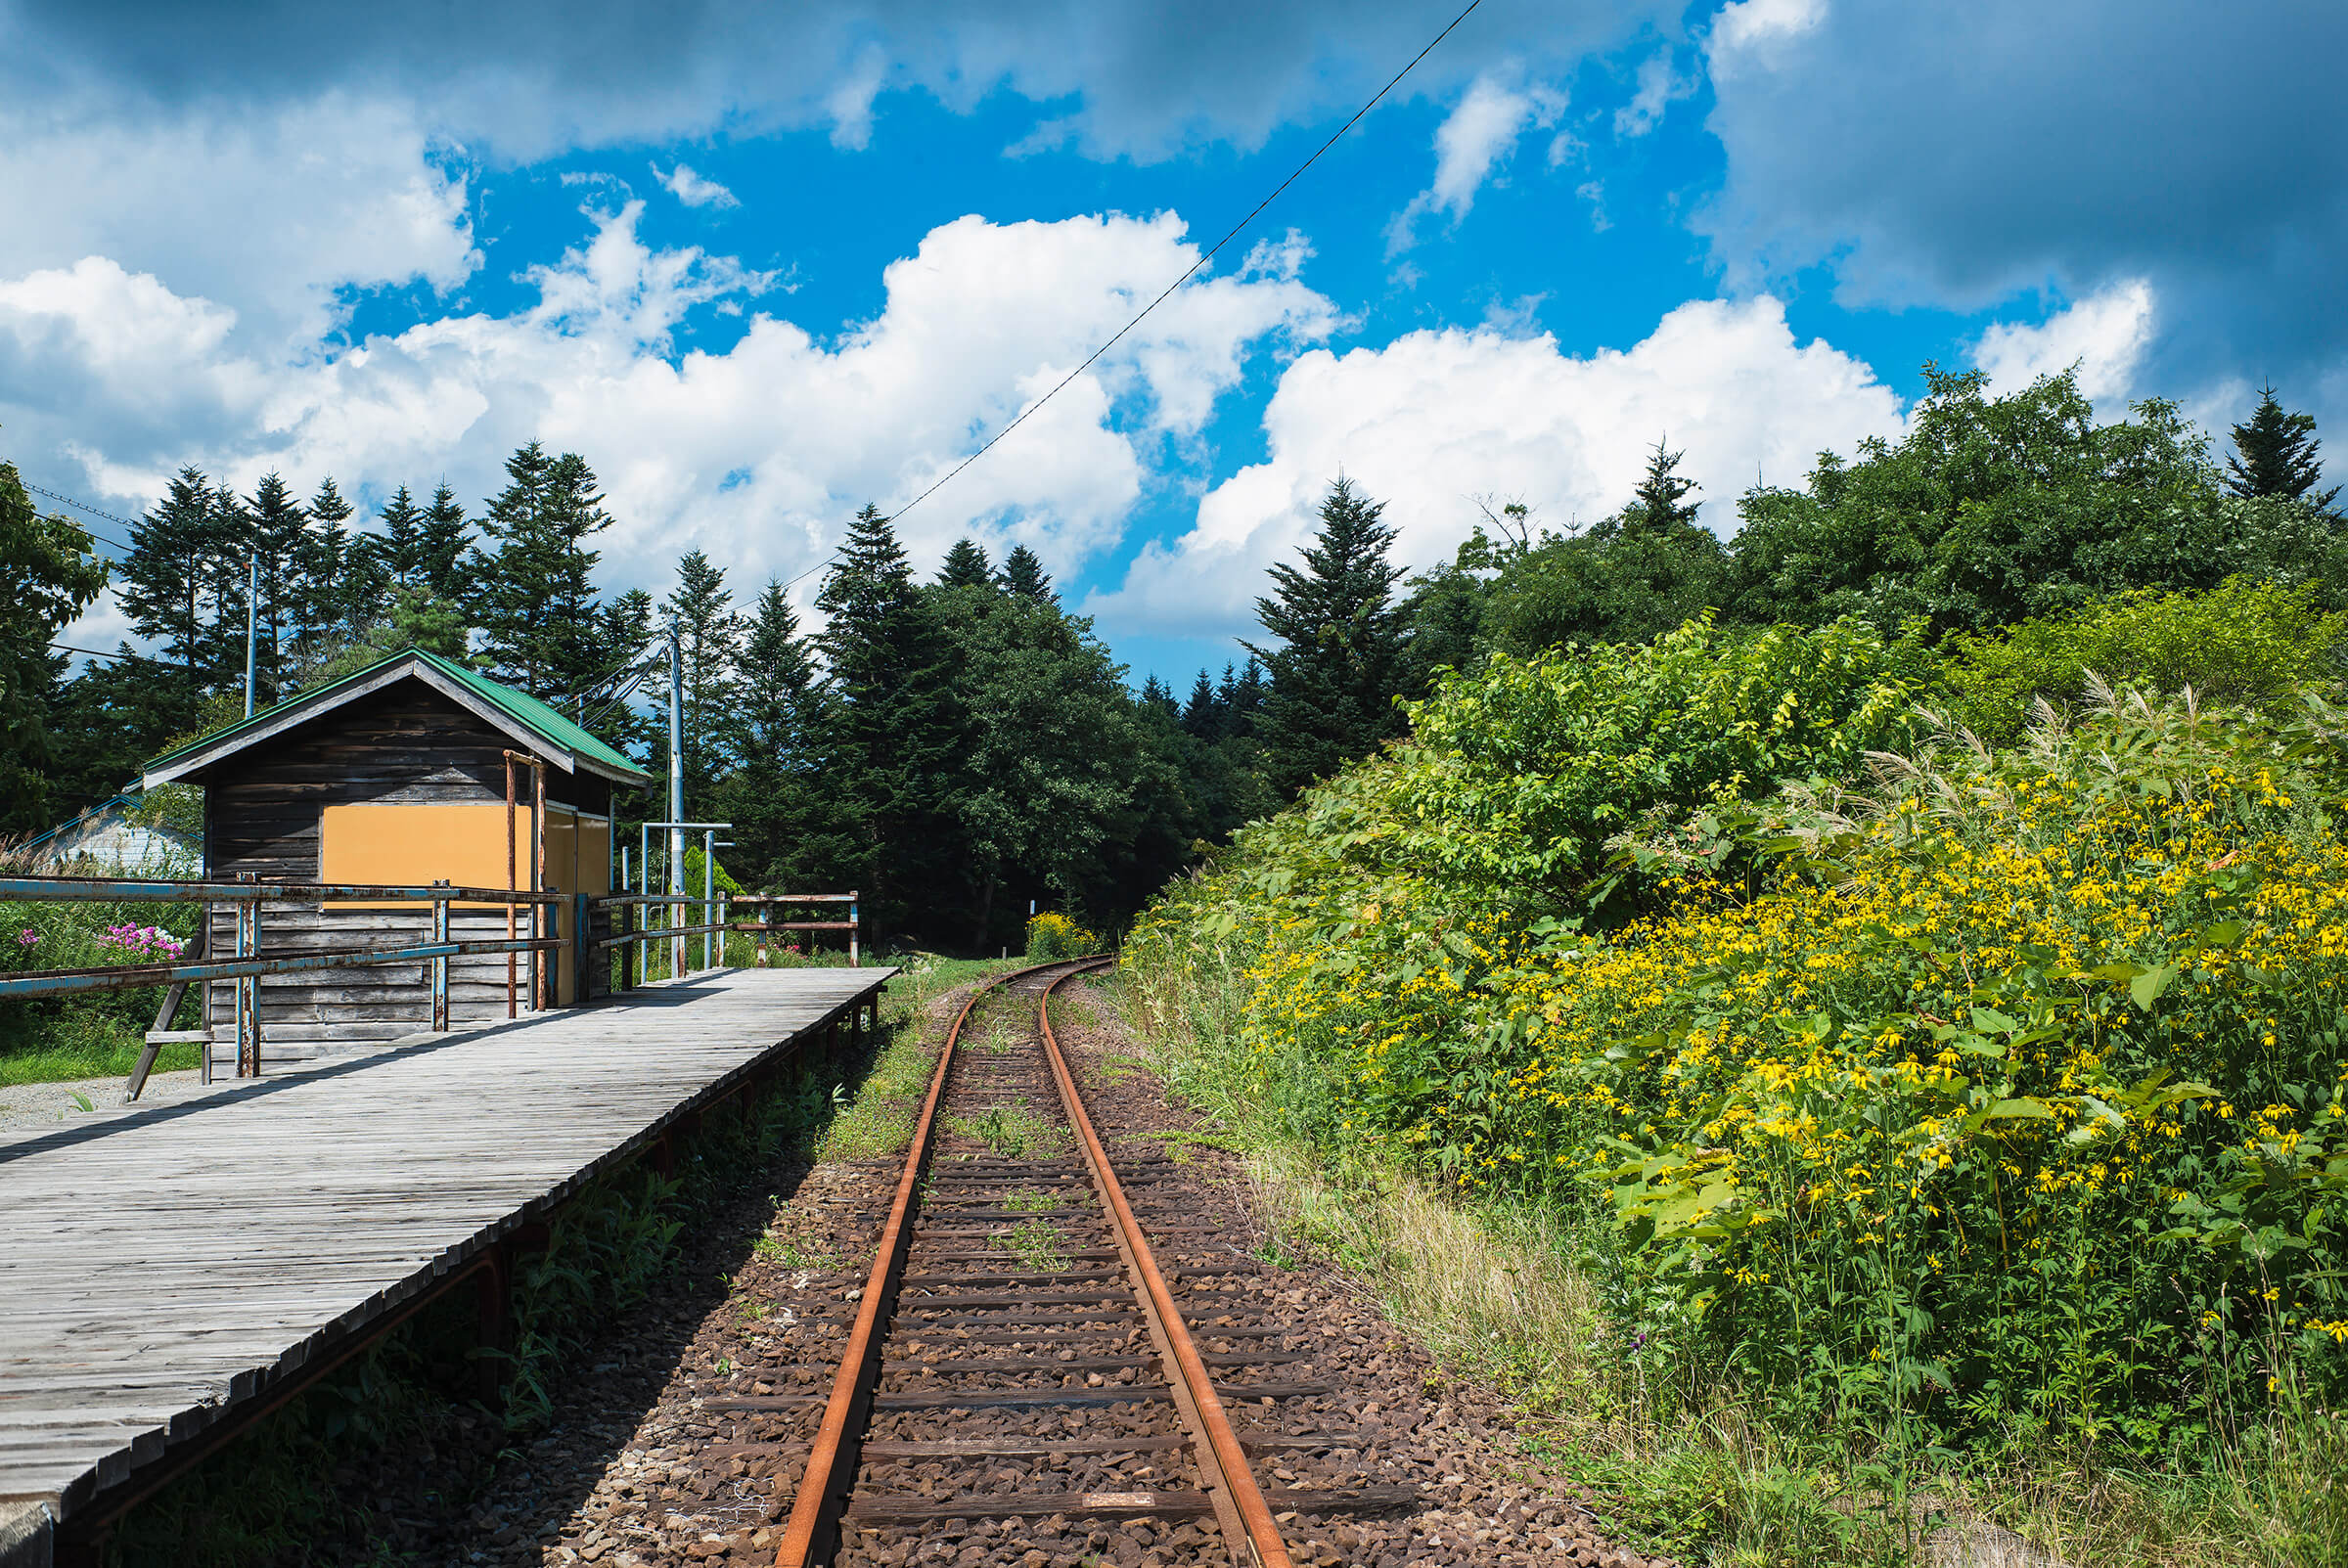 A small and semi-delapidated train station and platform in a sunny forested area.